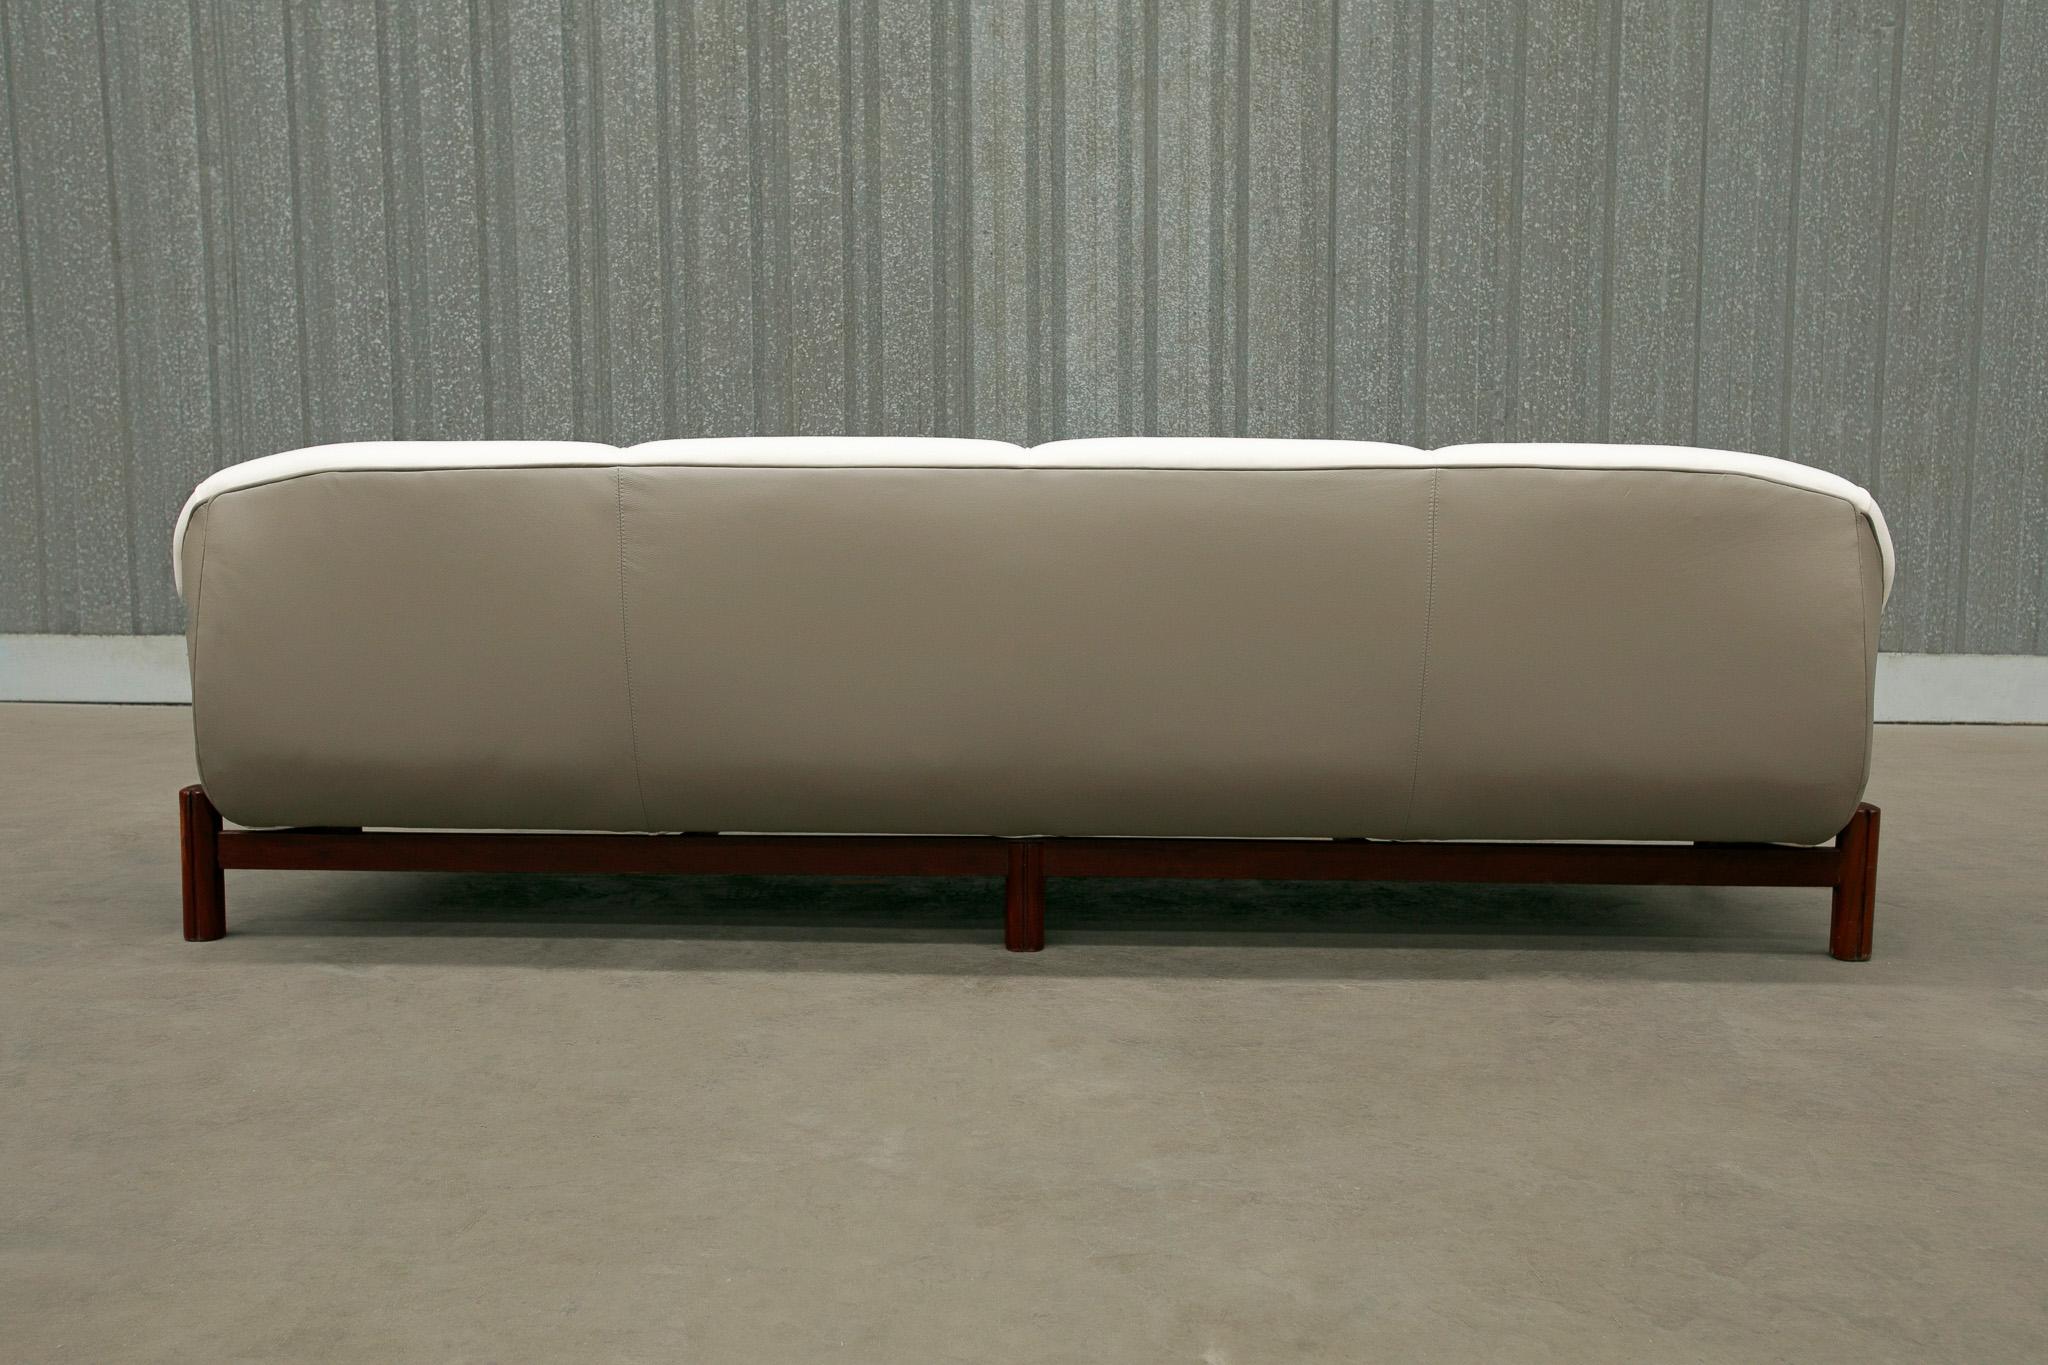 Woodwork Brazilian Modern Sofa in Hardwood, Grey Leather & White Fabric by Cimo, 1960s For Sale